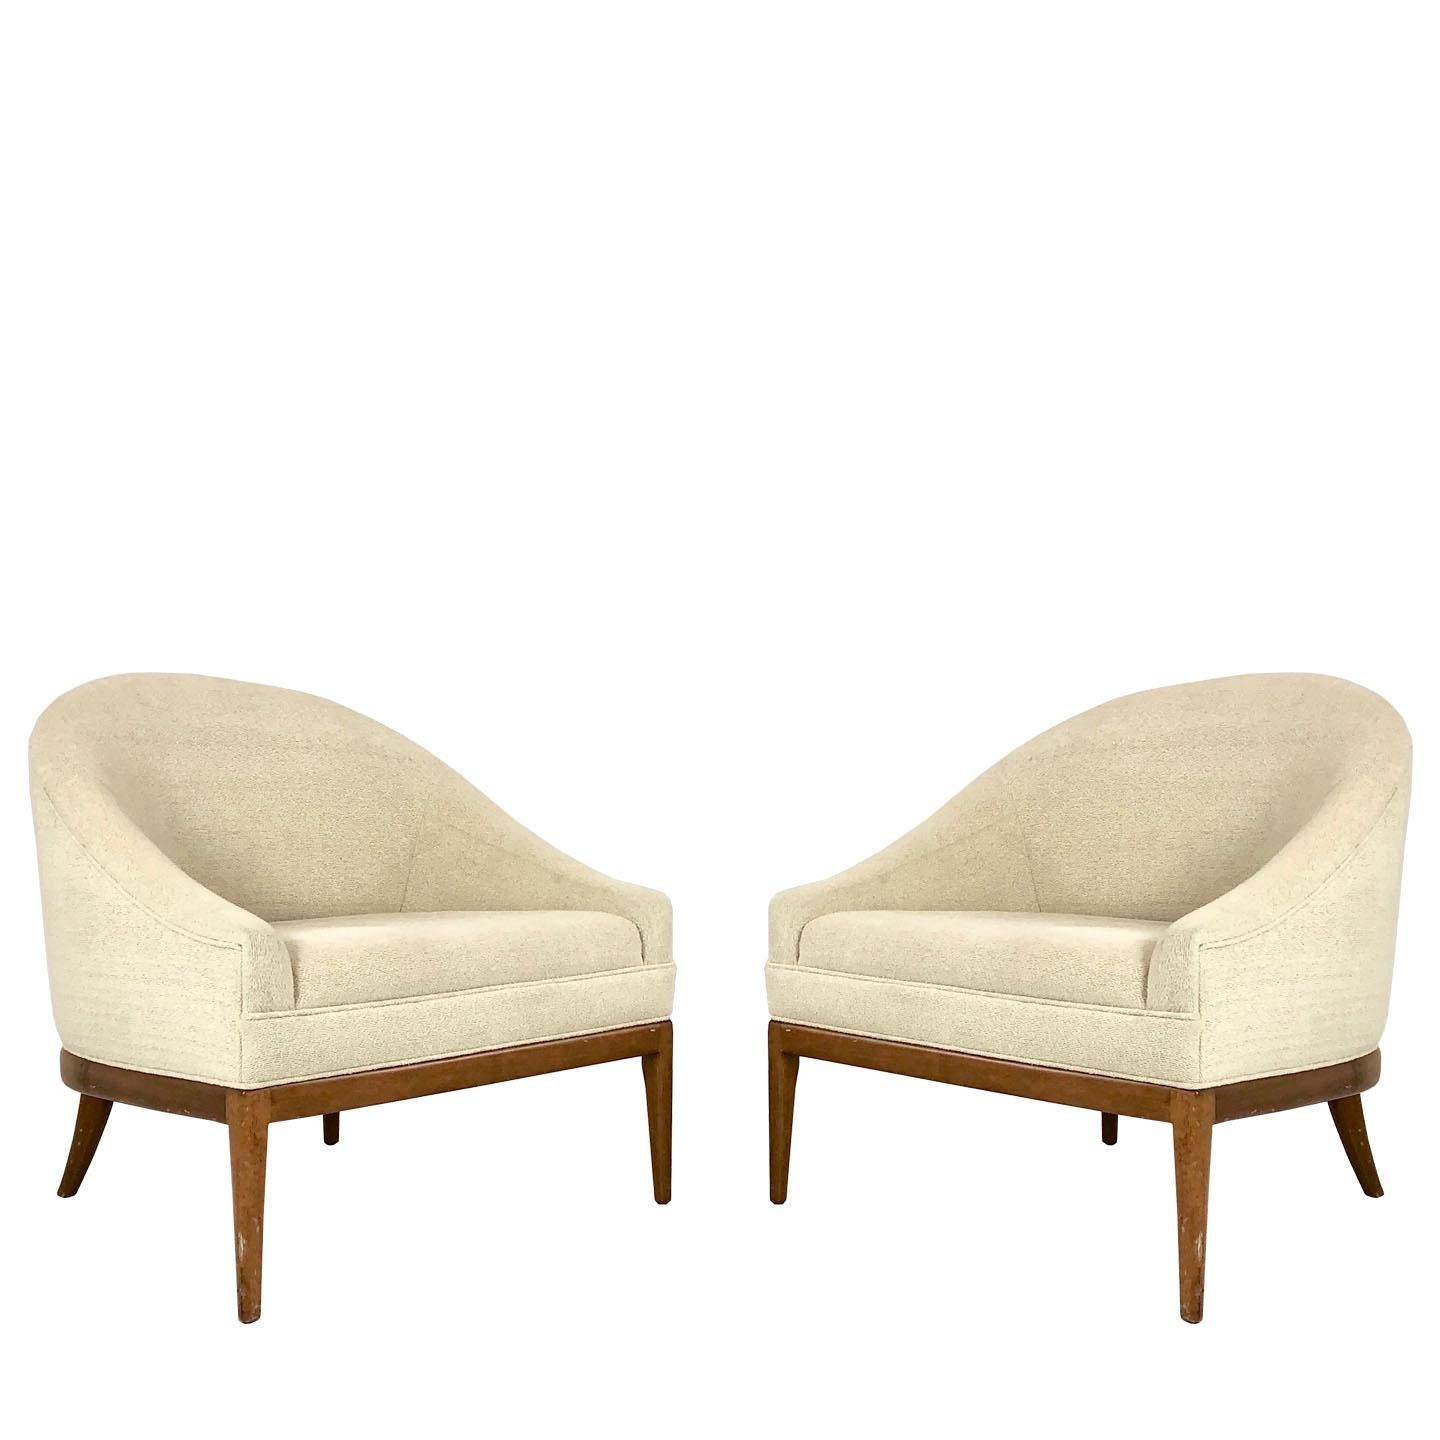 Pair of Slipper Lounge Chairs with Wood Base in the Style of Ward Bennett